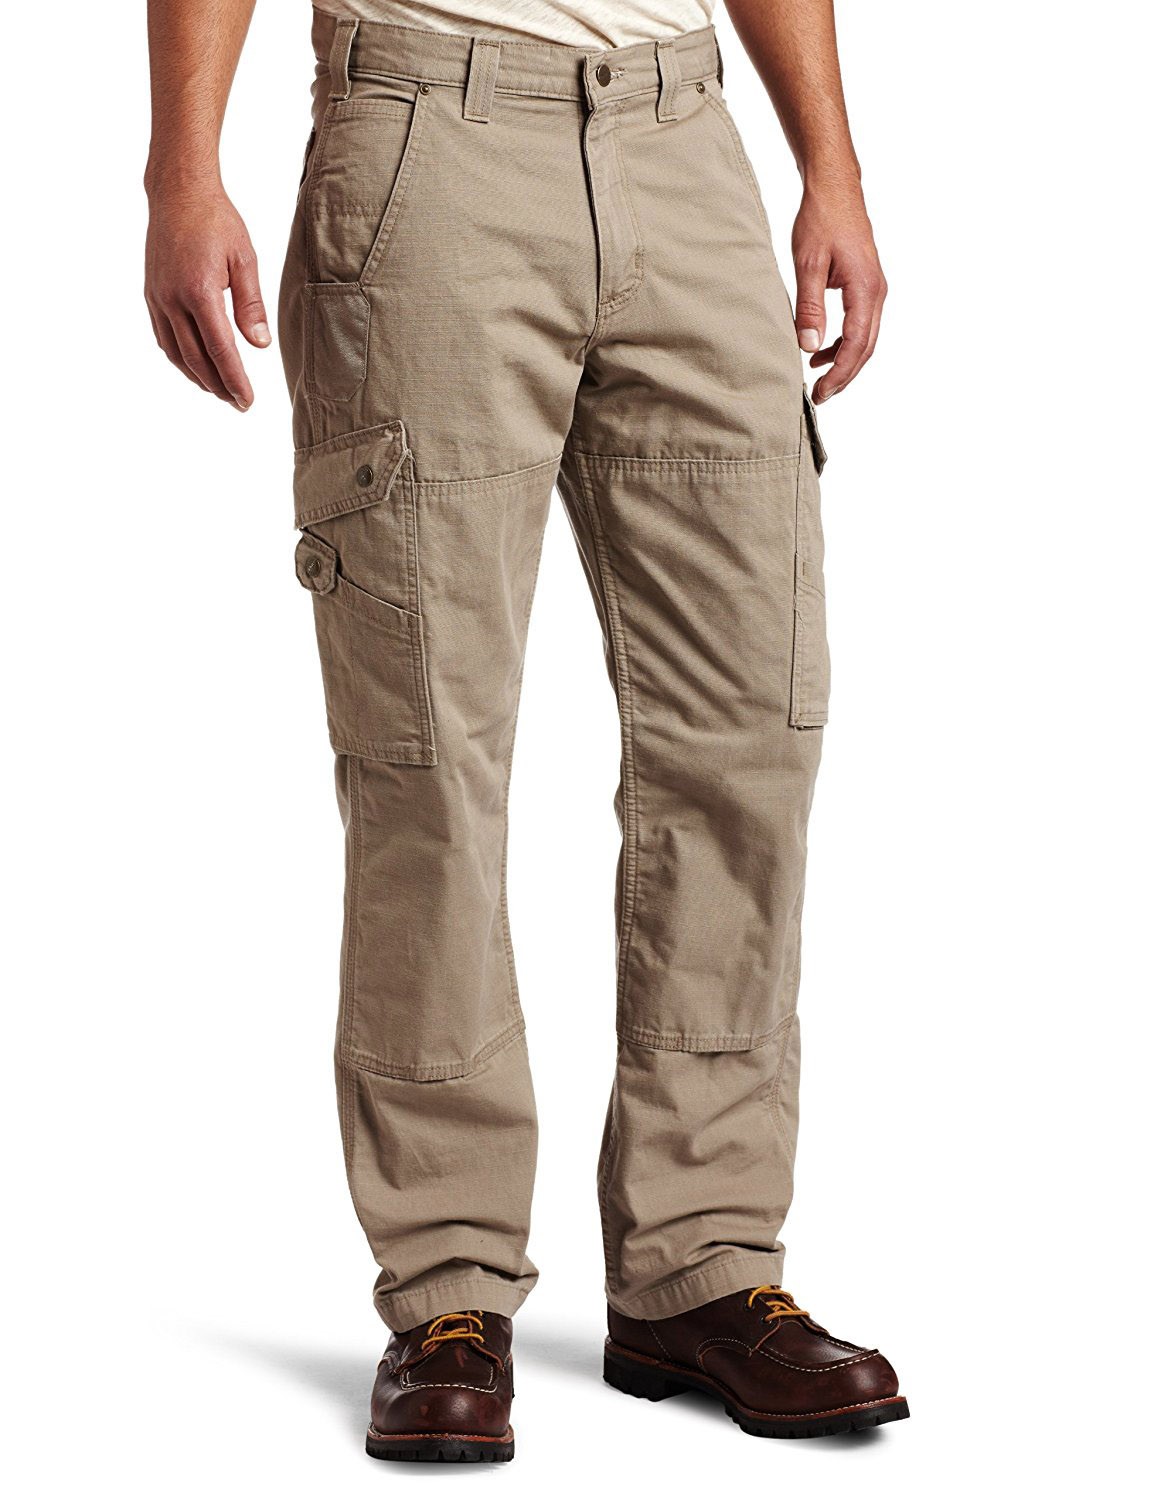 most durable work jeans